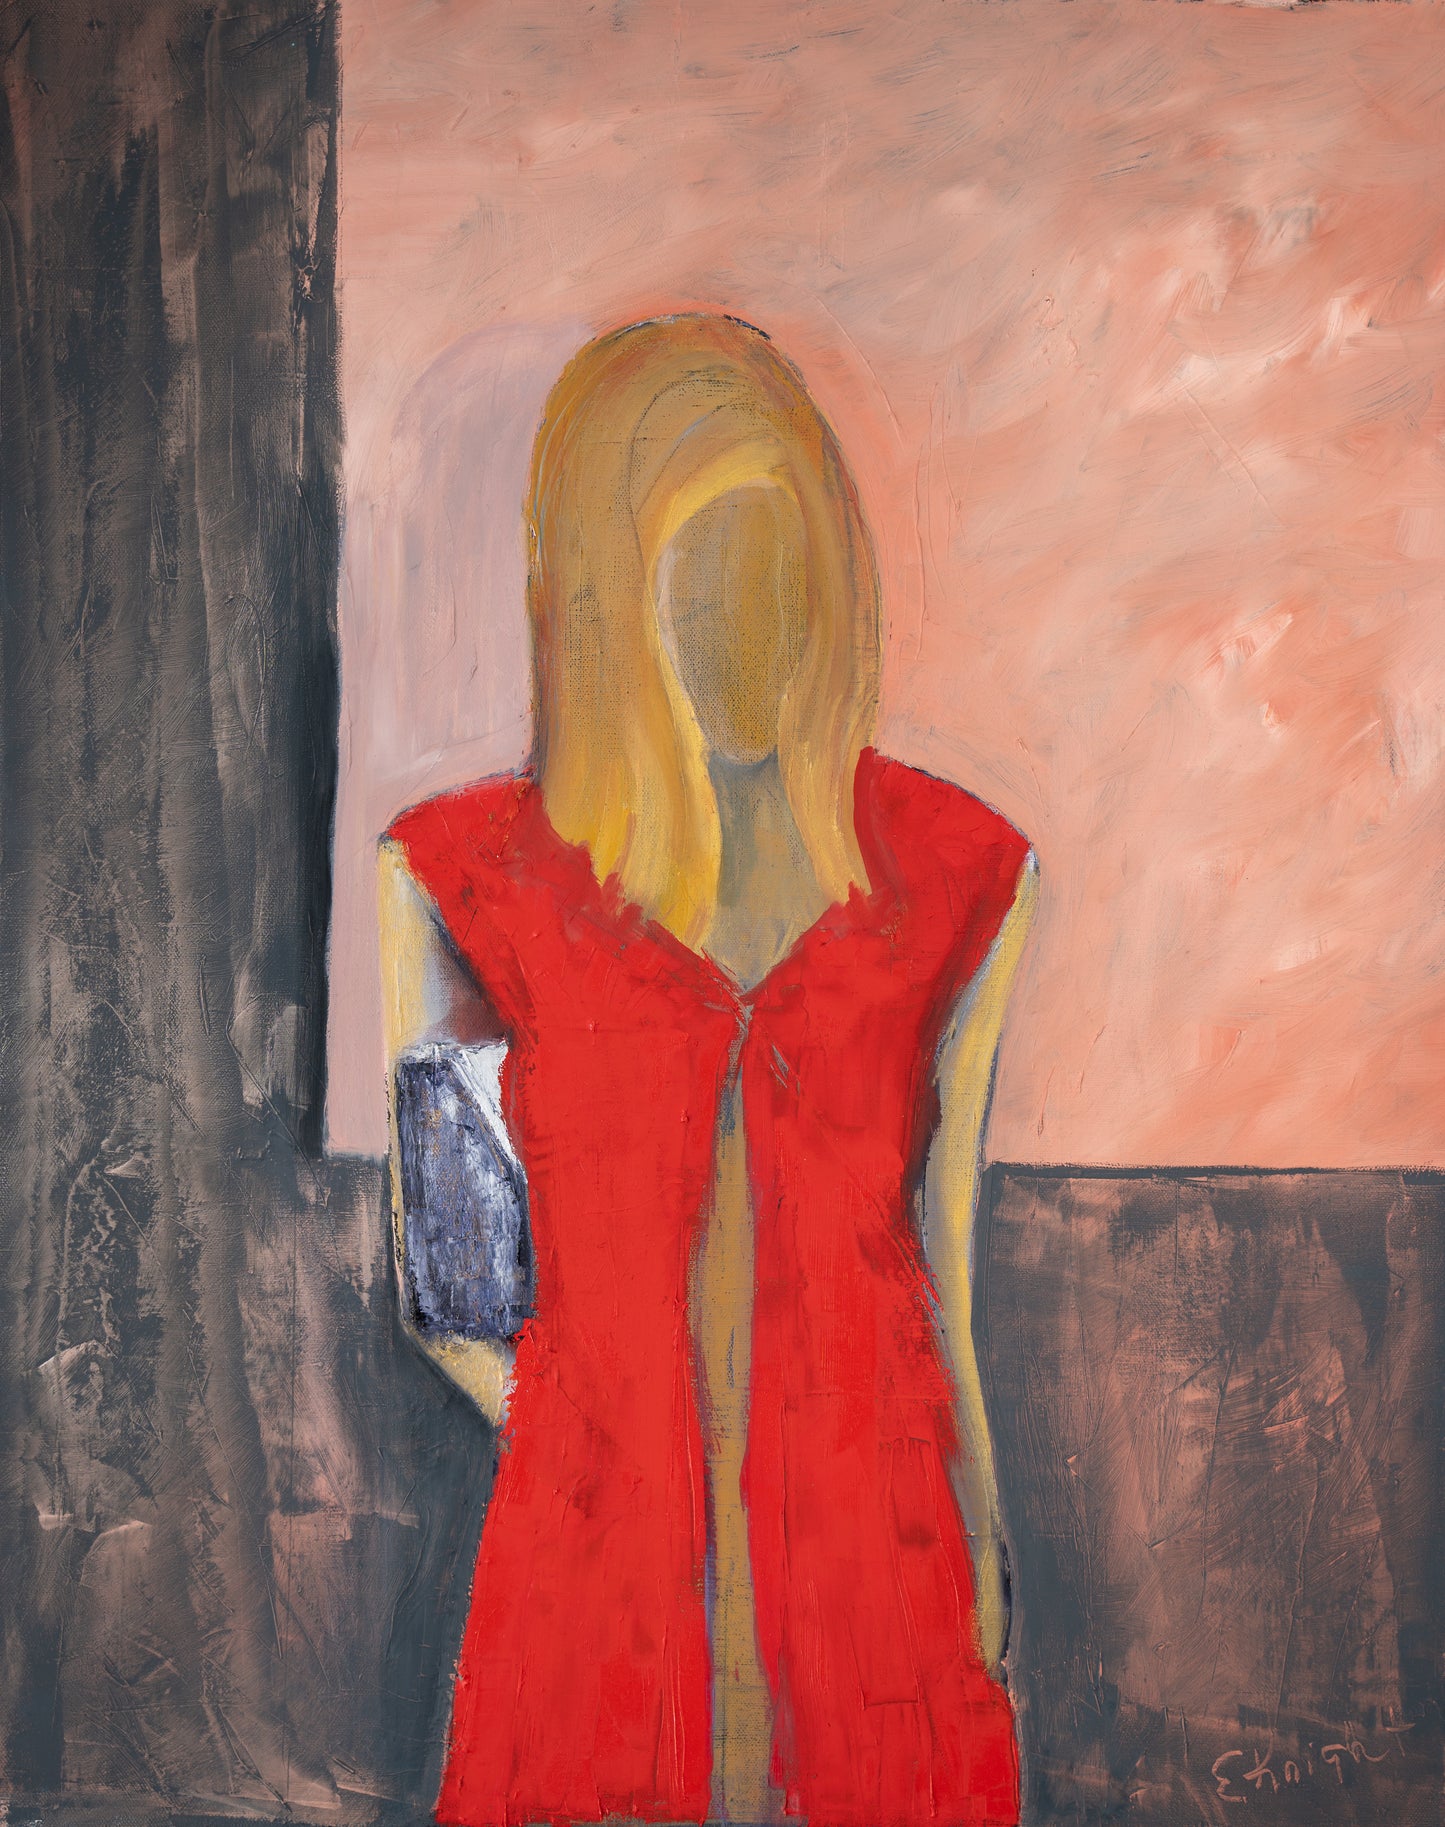 "LADY IN RED" ORIGINAL 30x24" OIL ON CANVAS